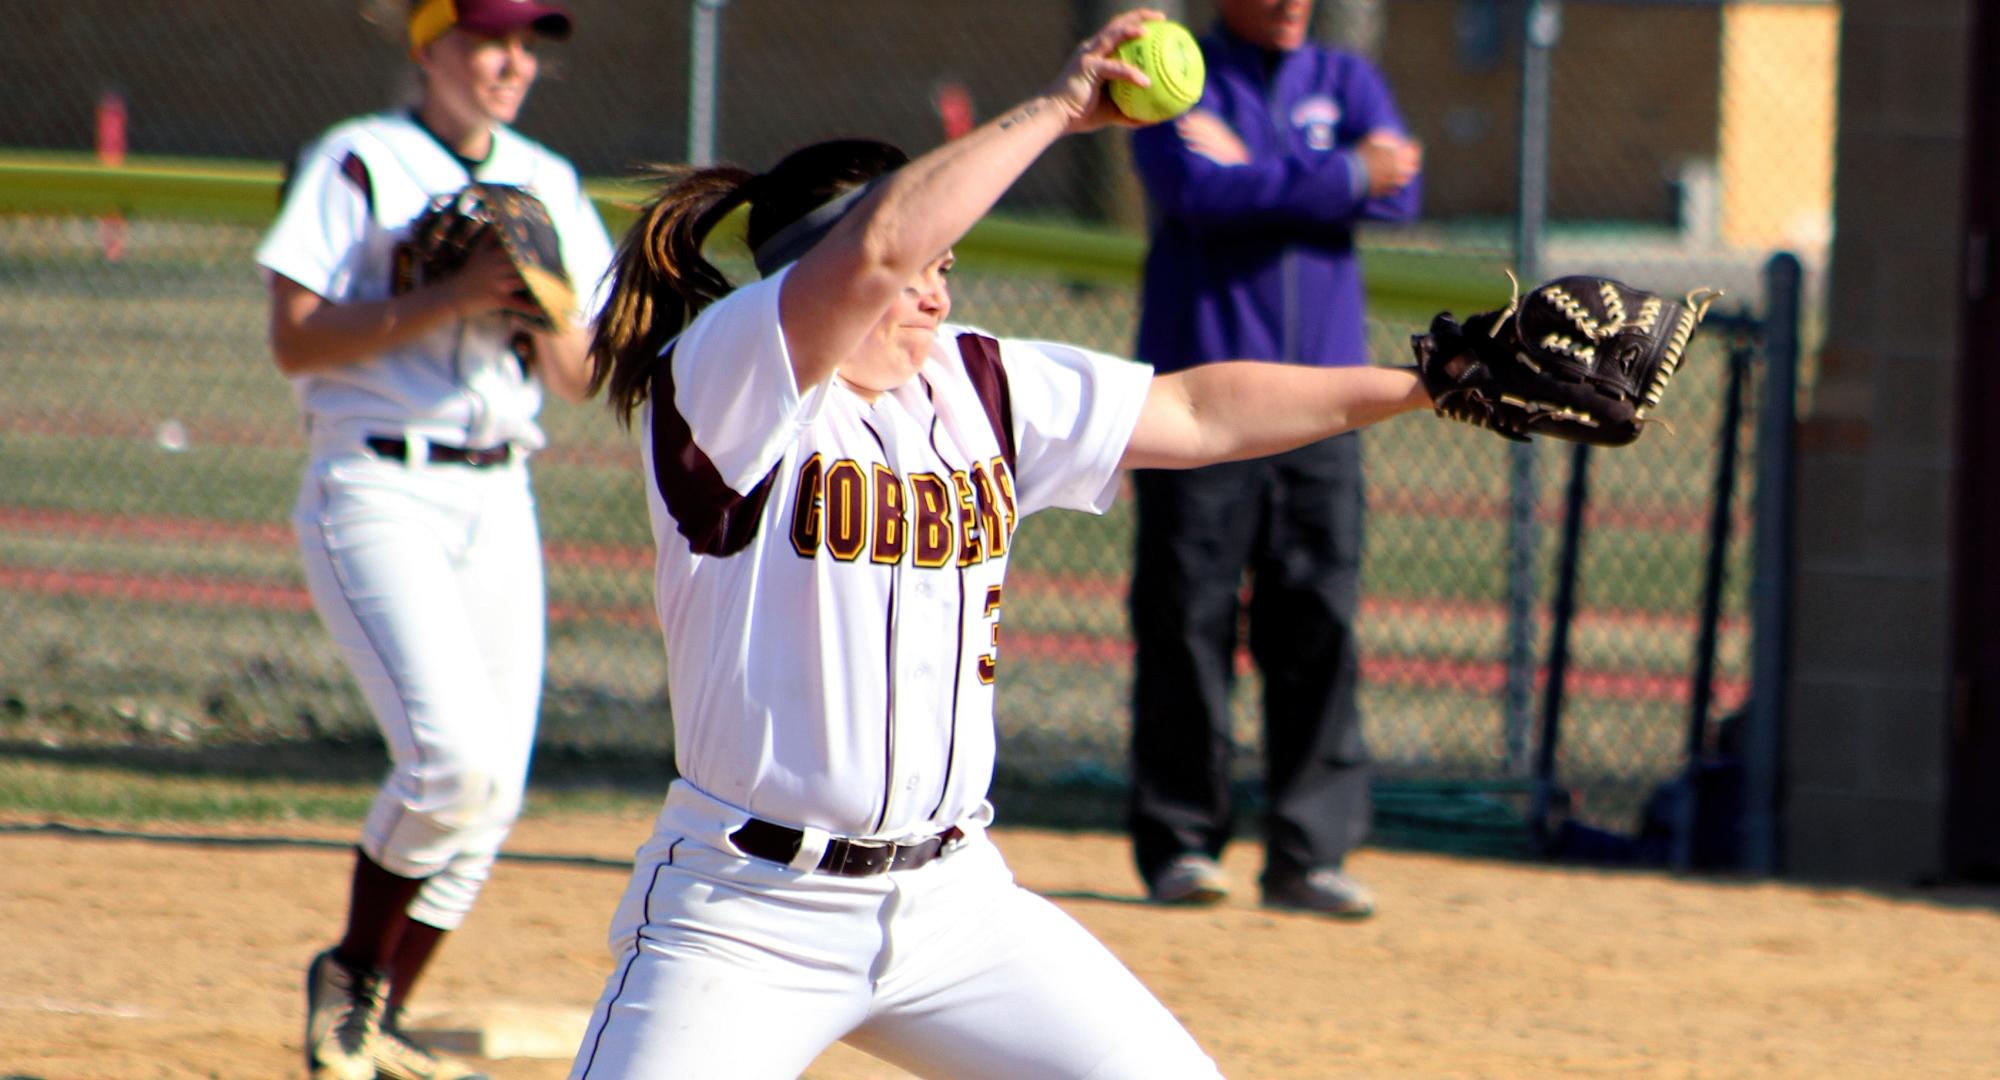 Sophomore Lexi Olek gets ready to throw a pitch in the first game of the Cobbers' DH with St. Thomas. She pitched 3.0 scoreless innings in her first college pitching experience of her career.